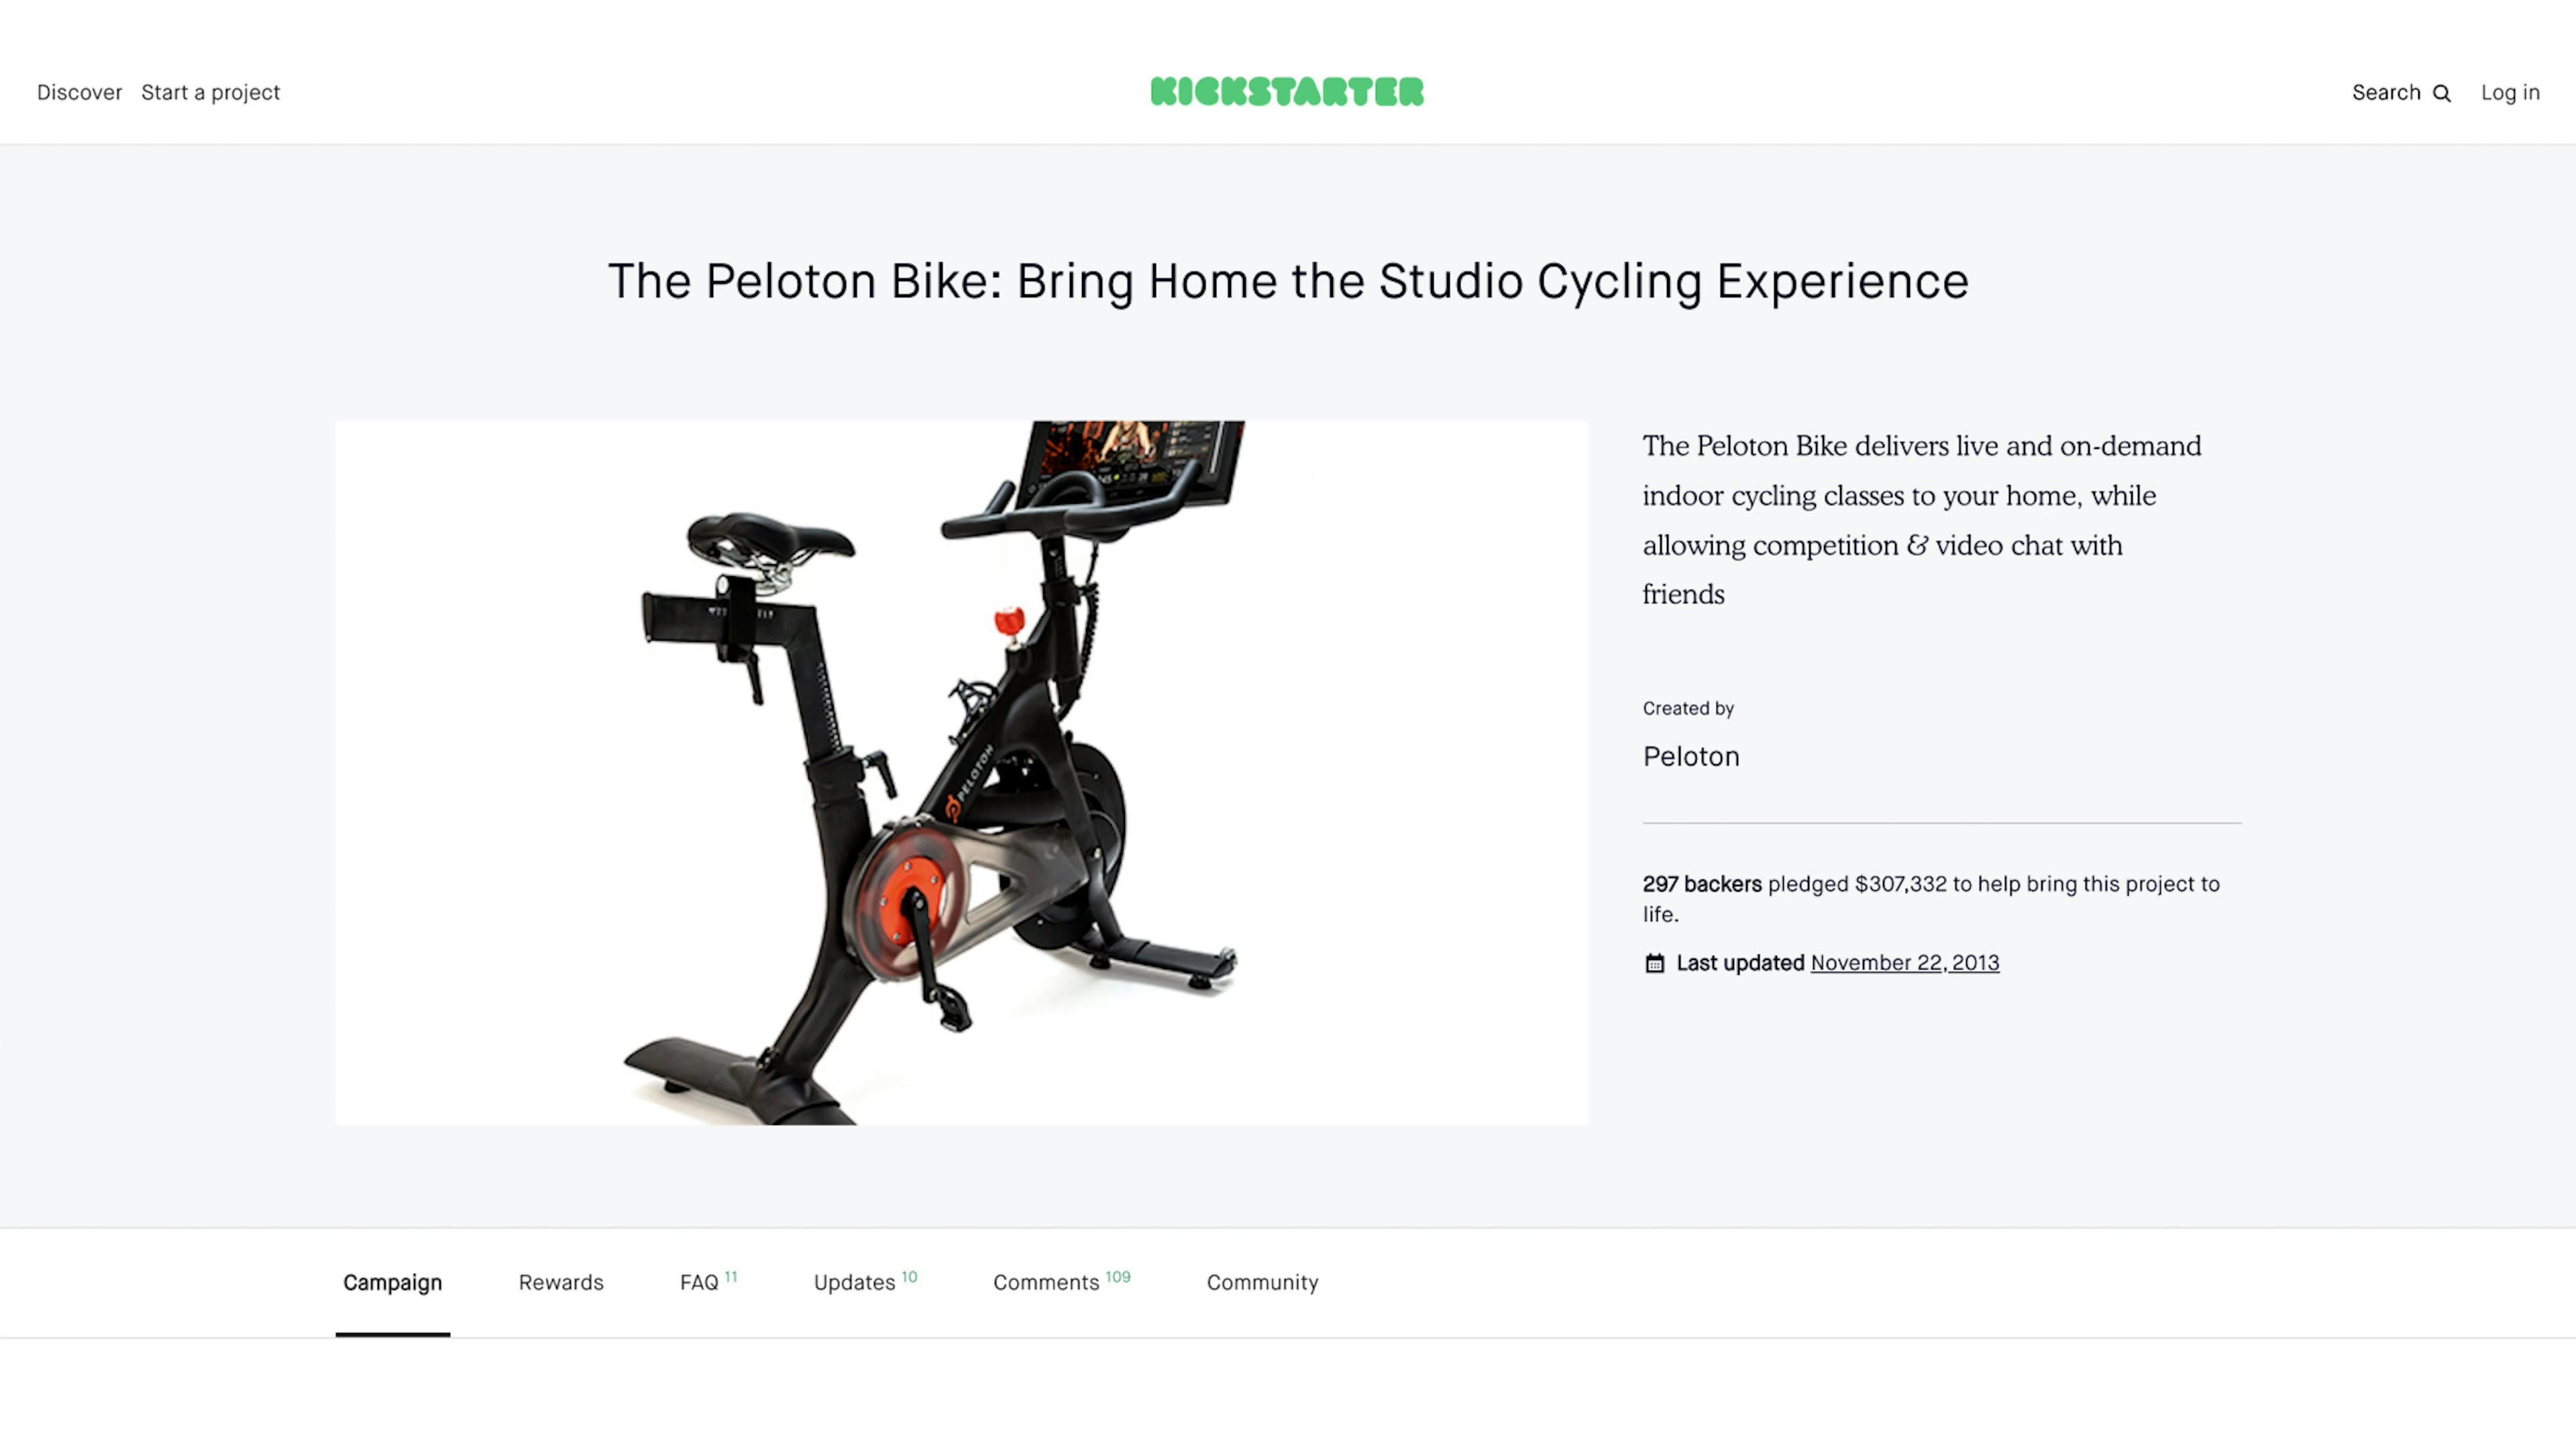 Launching the Most Successful Kickstarter Product in Fitness